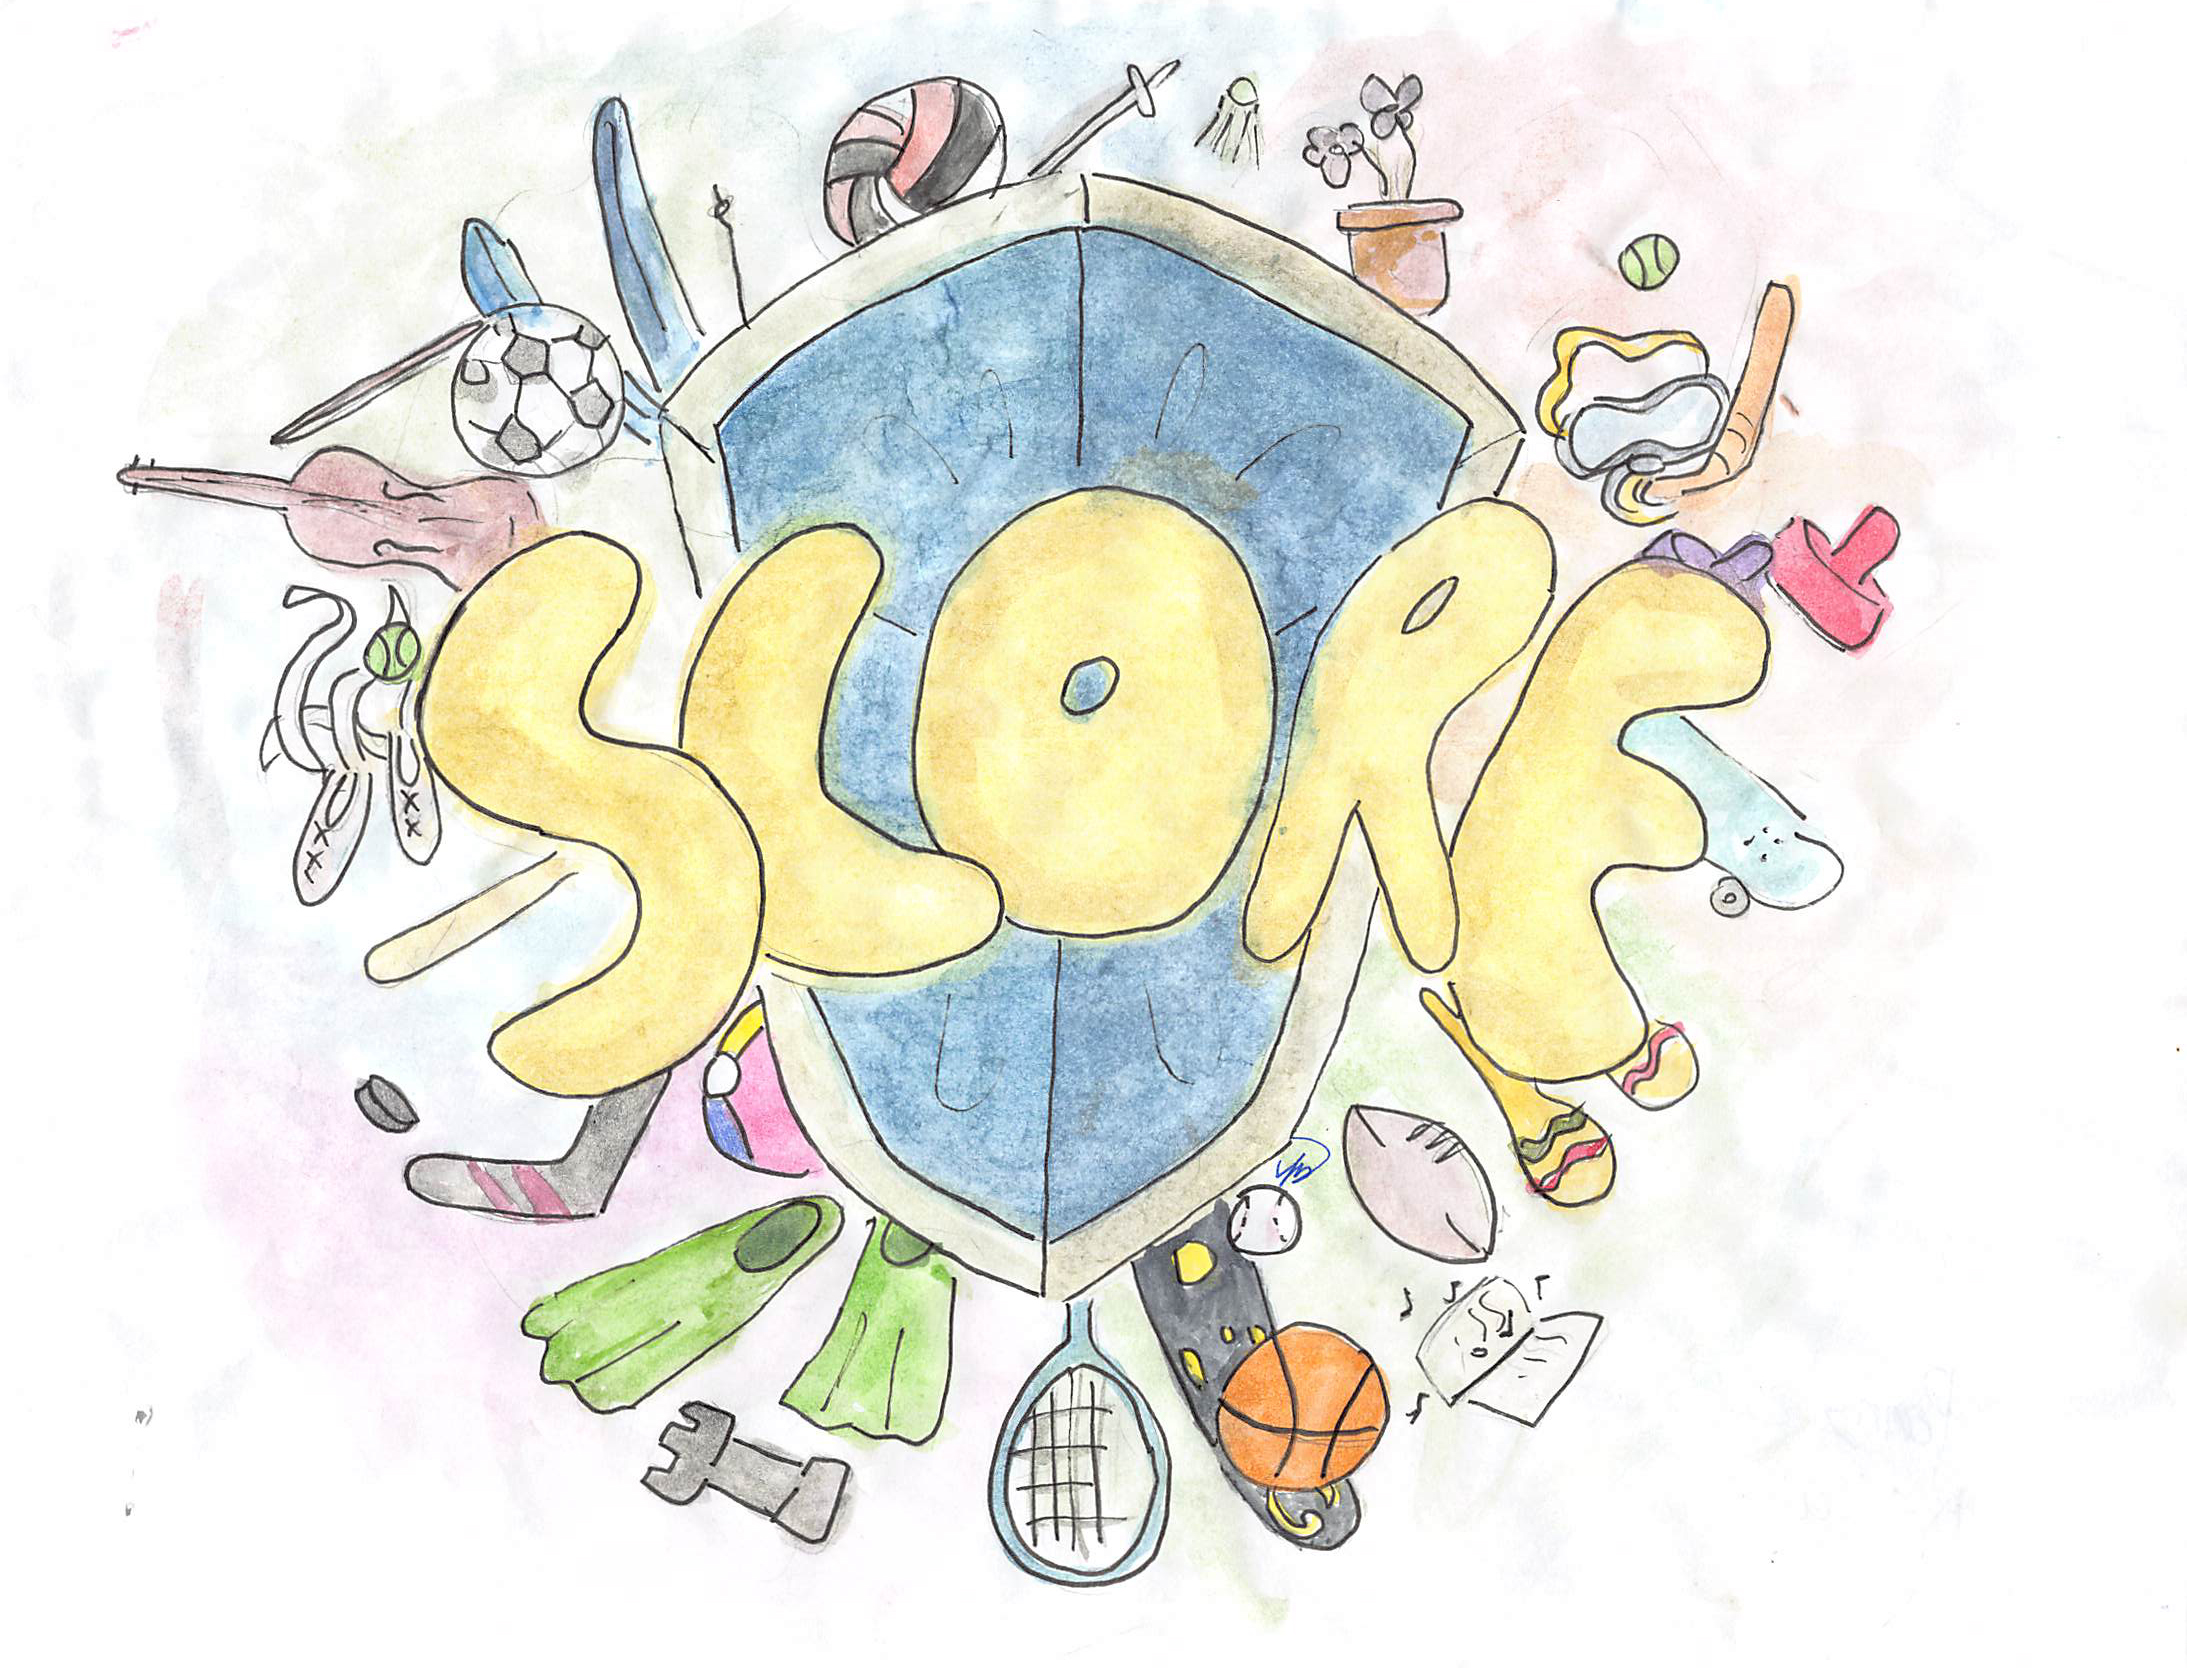 Pencil crayon drawing for the SCORE! logo contest. The drawing includes various sports and musical activities.